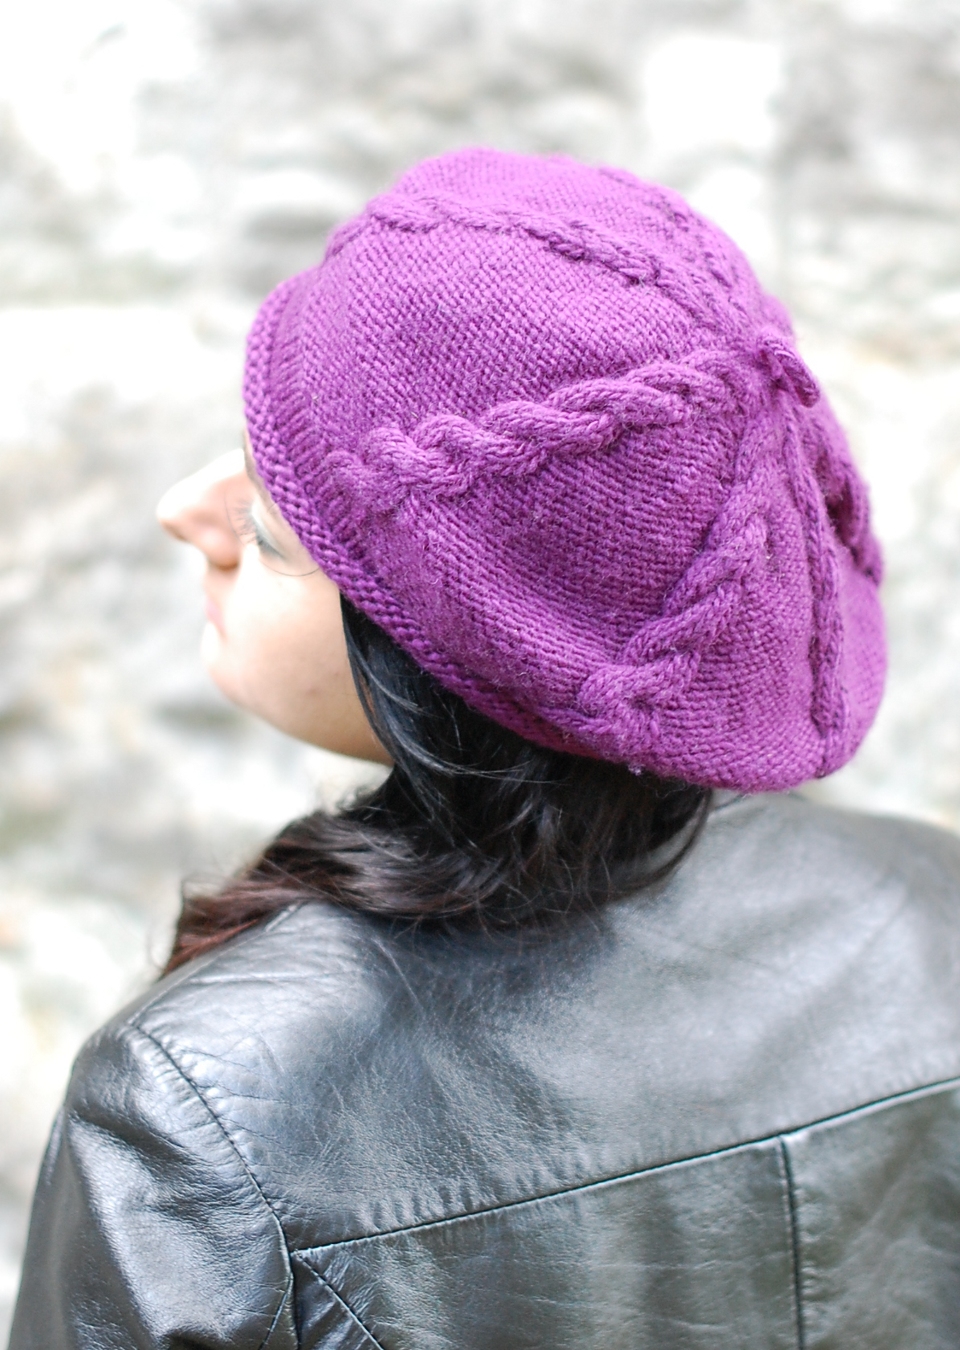 Cabled Cap knitting pattern